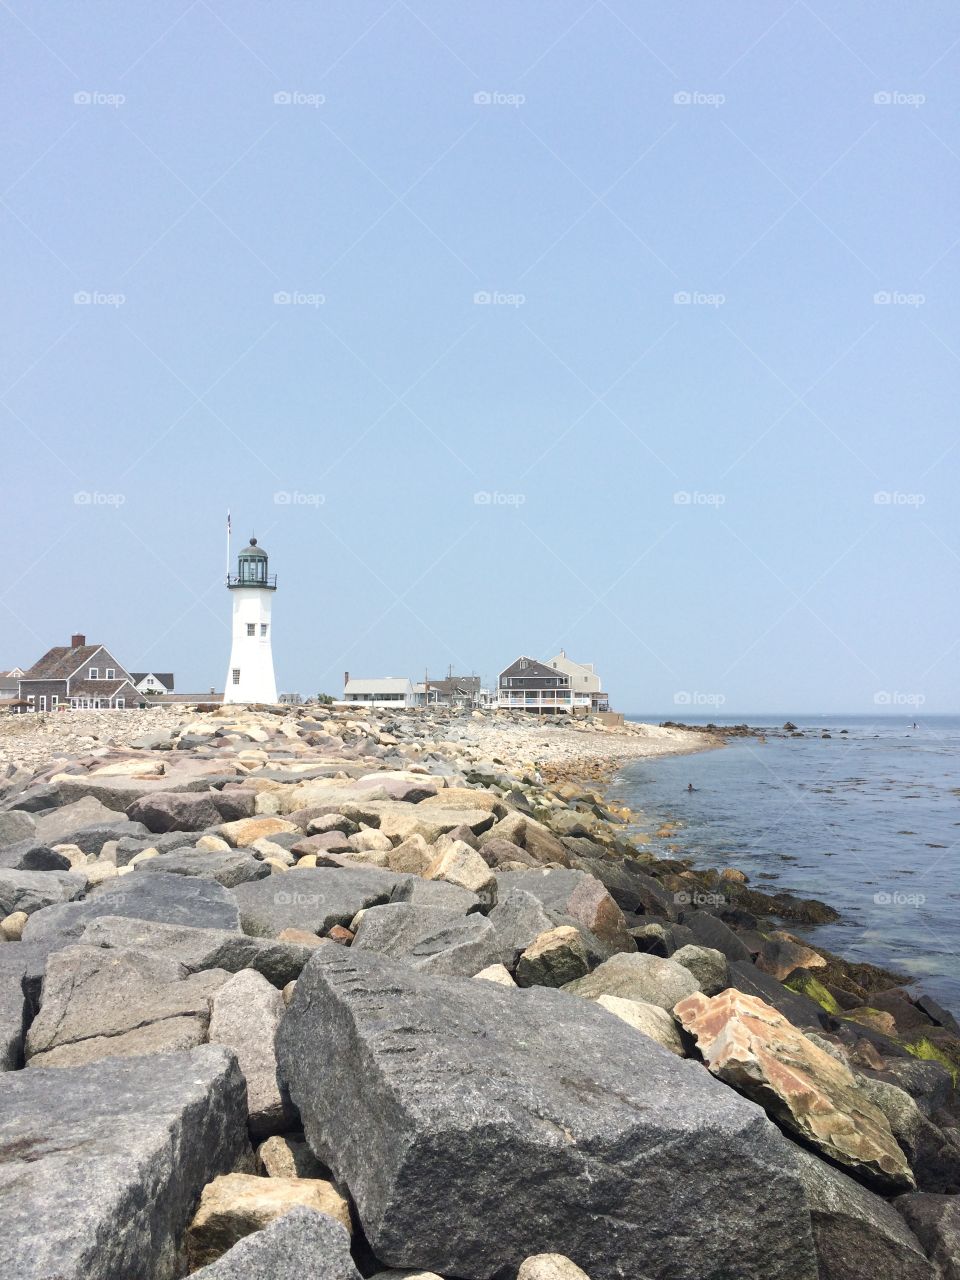 Scituate Lighthouse in July. Scituate lighthouse along the coastline in summer. 